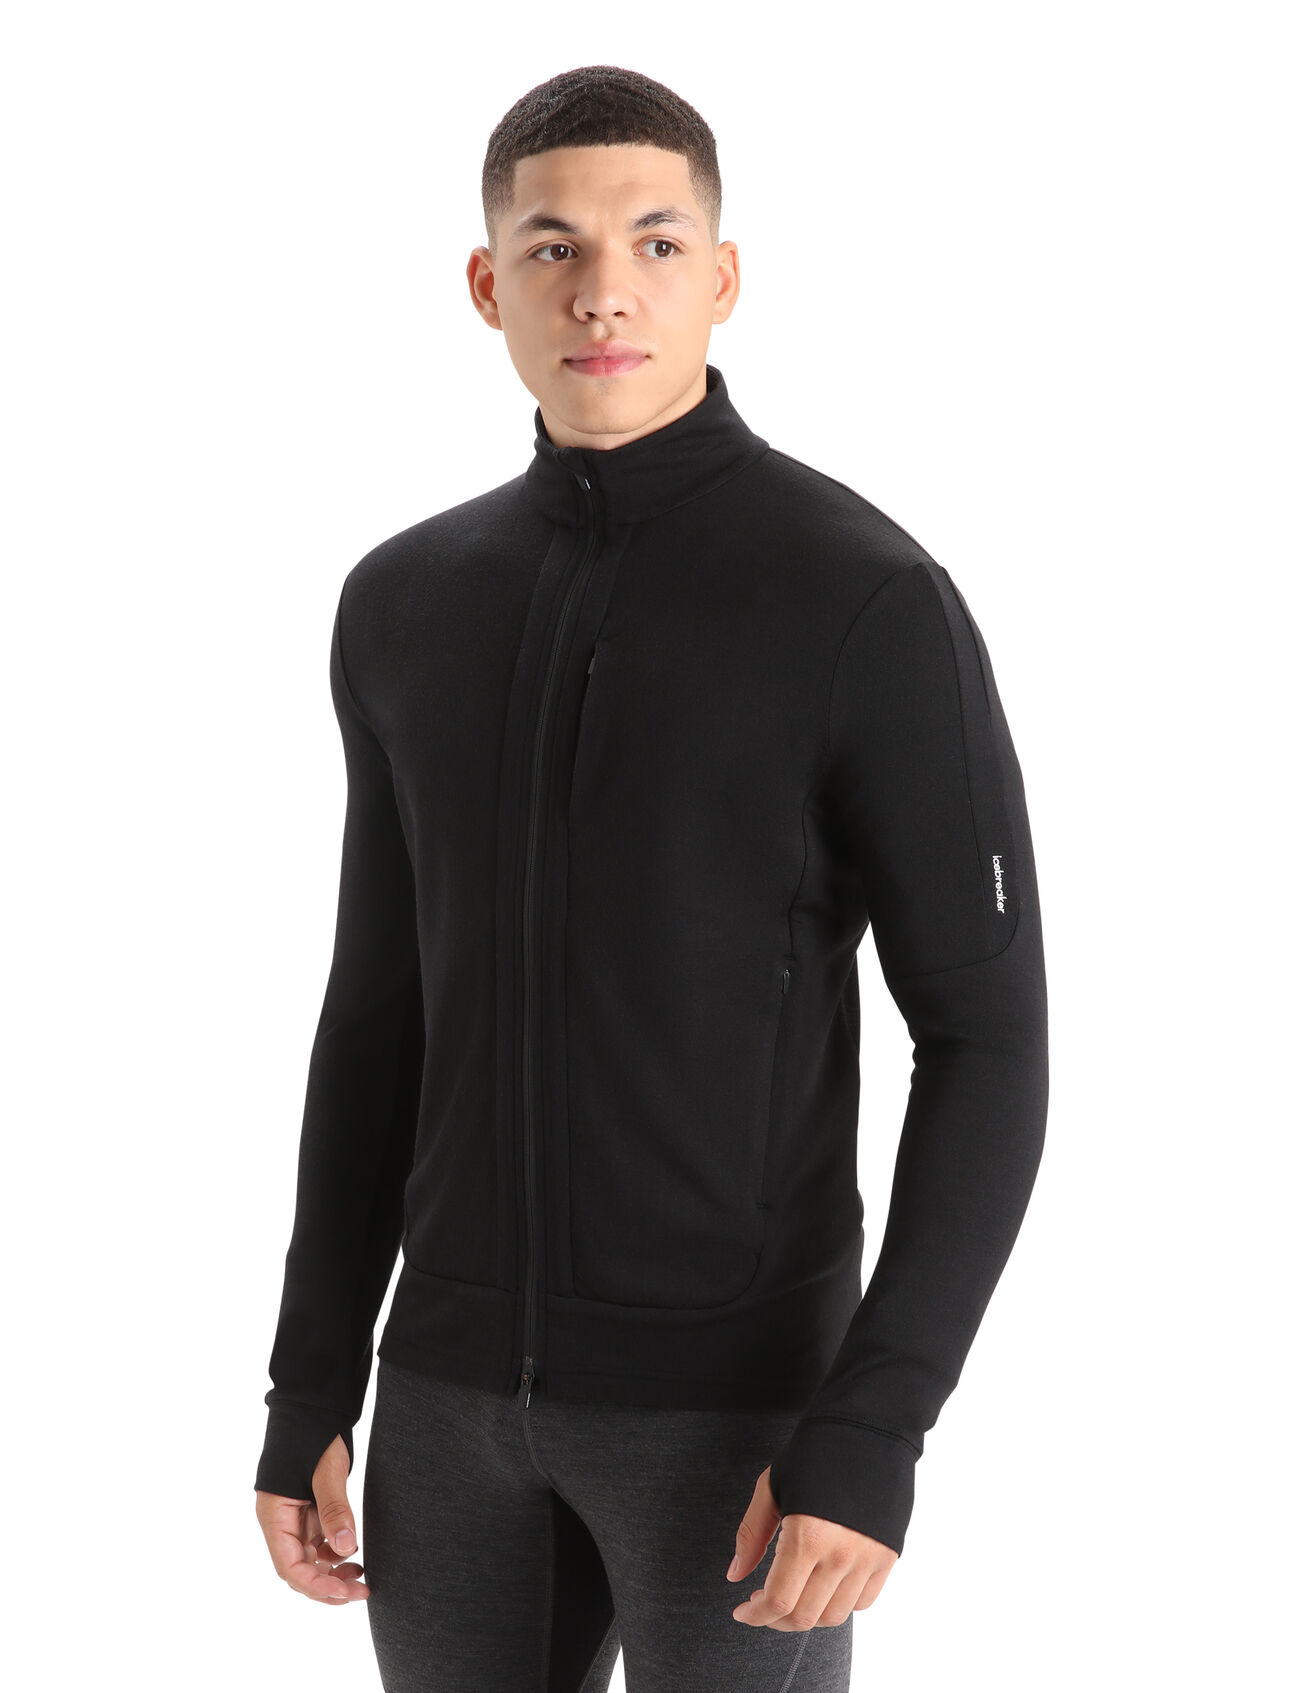 Mens Merino Quantum III Long Sleeve Zip Jacket A 100% merino wool mid layer ideal for technical mountain adventures, the Quantum III Long Sleeve Zip helps regulate your body temperature when you're on the move.